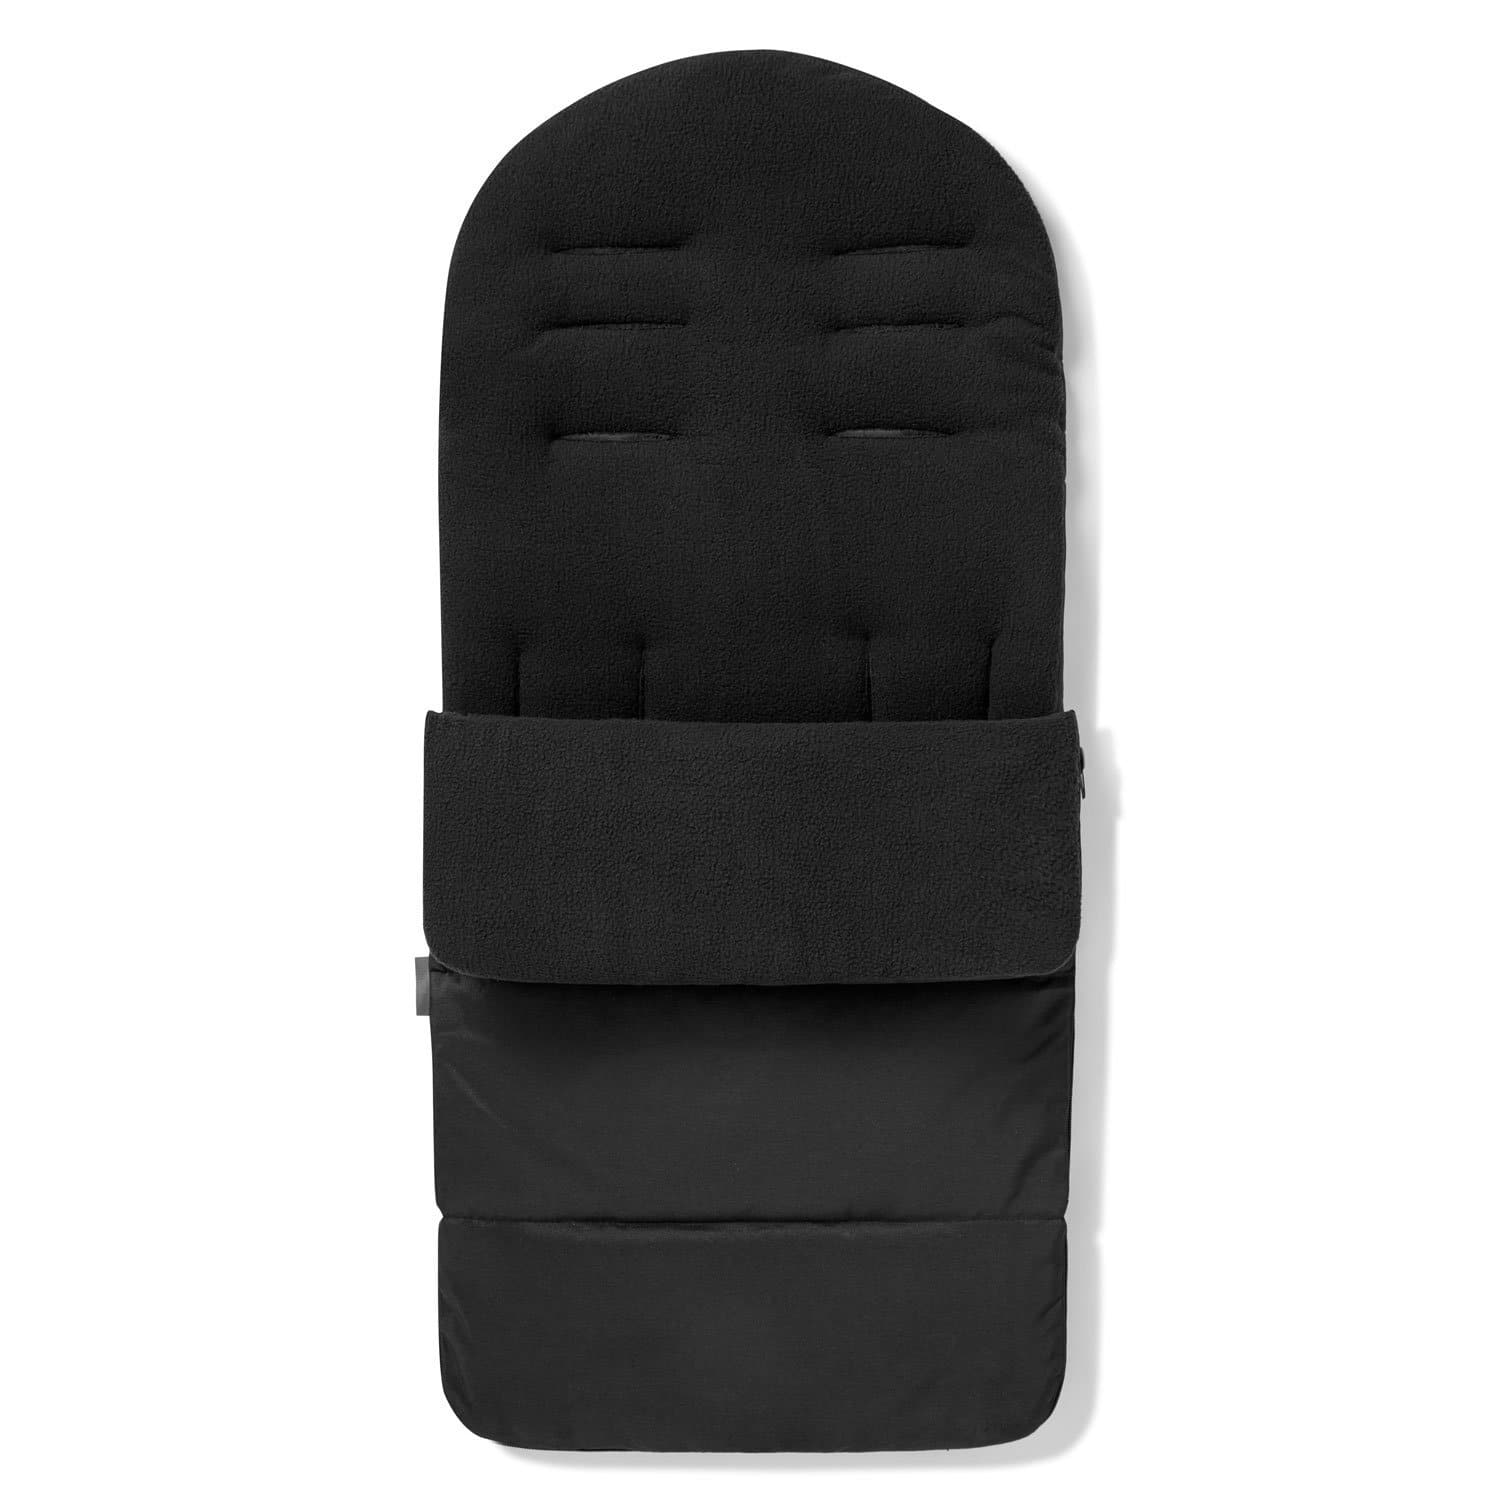 Premium Footmuff / Cosy Toes Compatible with Joie - Black Jack / Fits All Models | For Your Little One